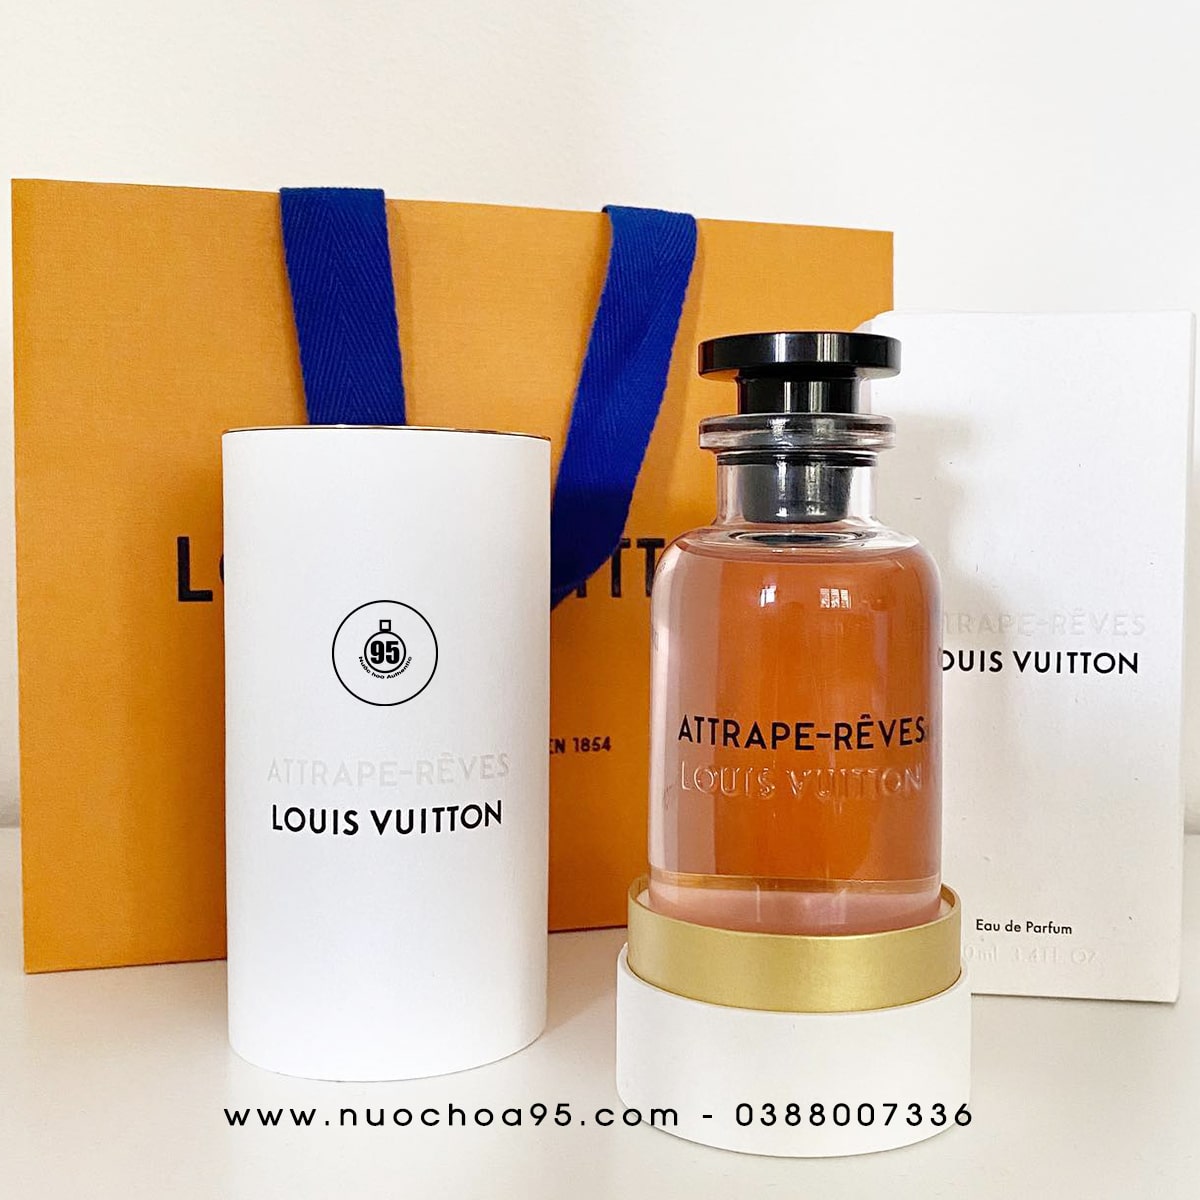 Shop for samples of AttrapeReves Eau de Parfum by Louis Vuitton for  women rebottled and repacked by MicroPerfumescom